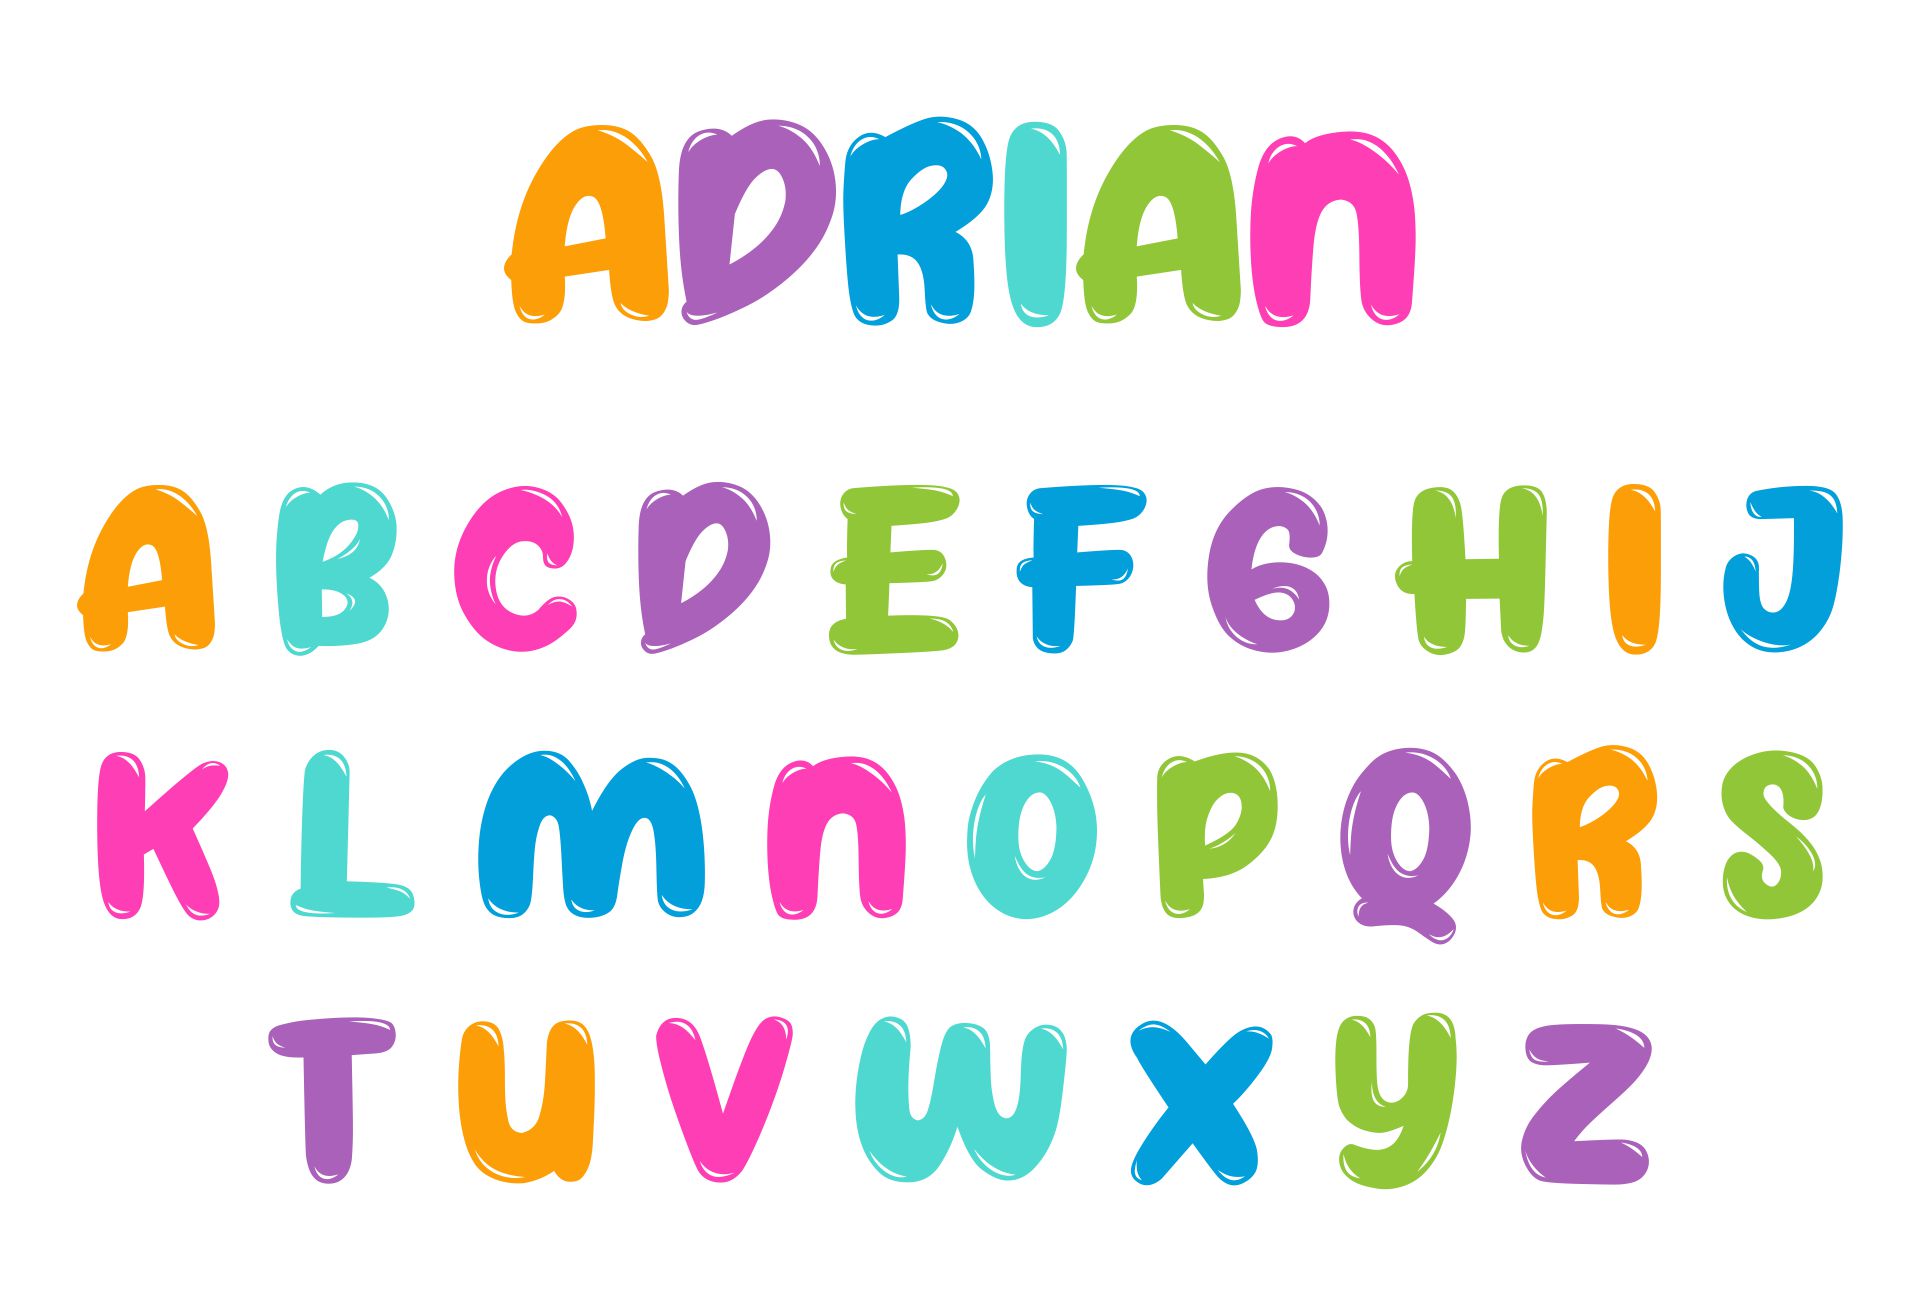 Name Adrian Bubble Letter